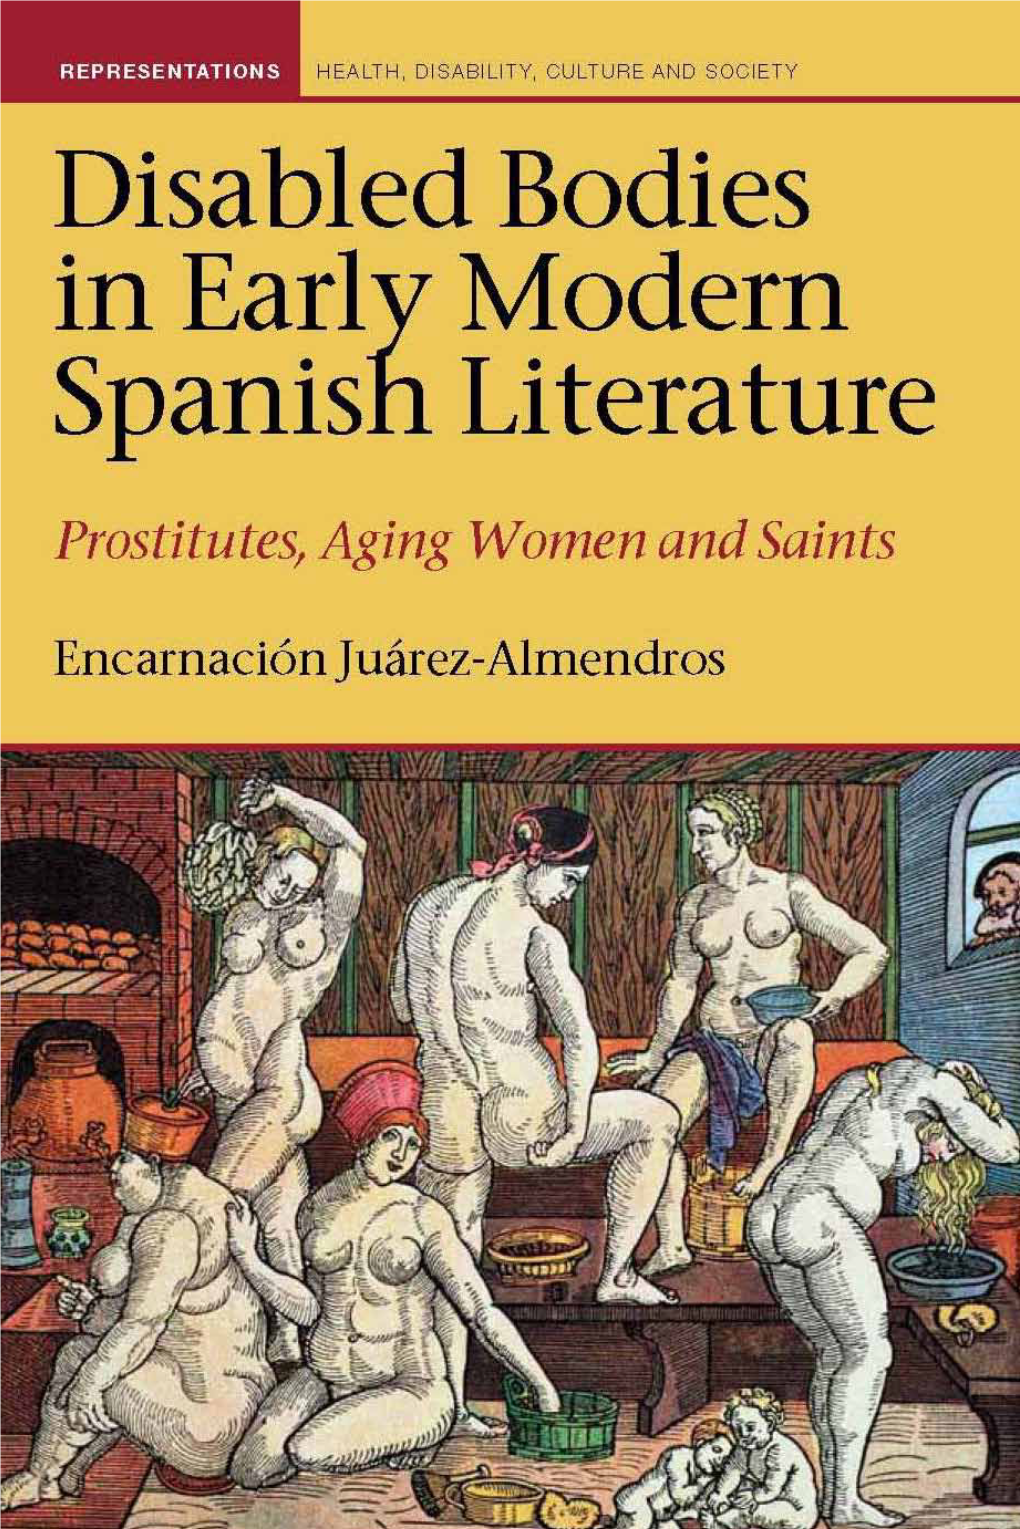 Disabled Bodies in Early Modern Spanish Literature: Prostitutes, Aging Women and Saints Representations: H E a Lt H , Di Sa Bi L I T Y, Culture and Society